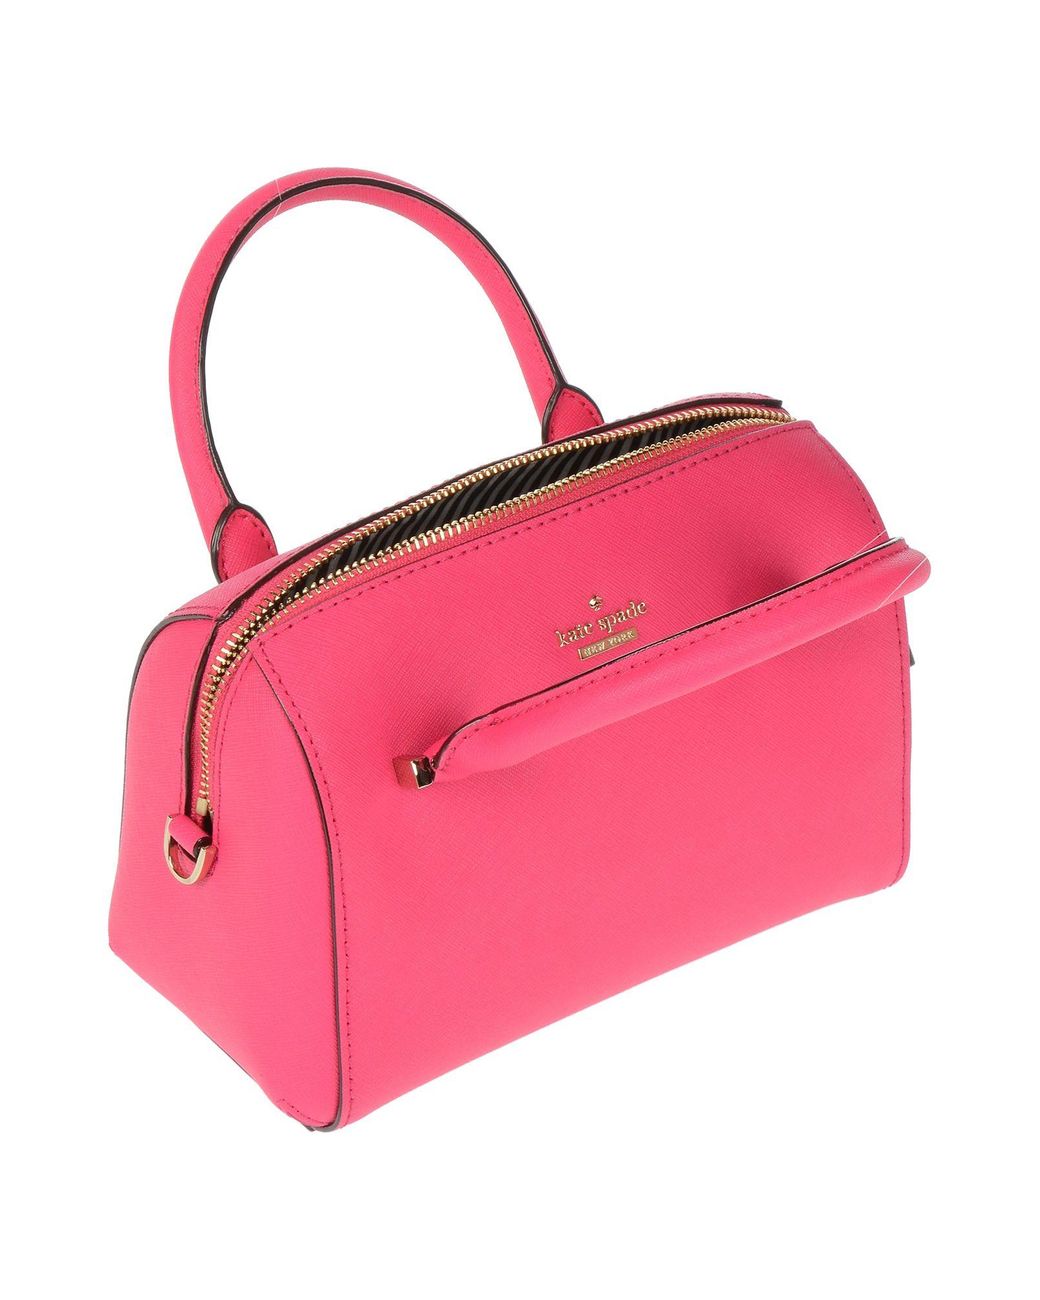 Kate Spade Hot Pink And Tangerine Leather Purse New, 45% OFF